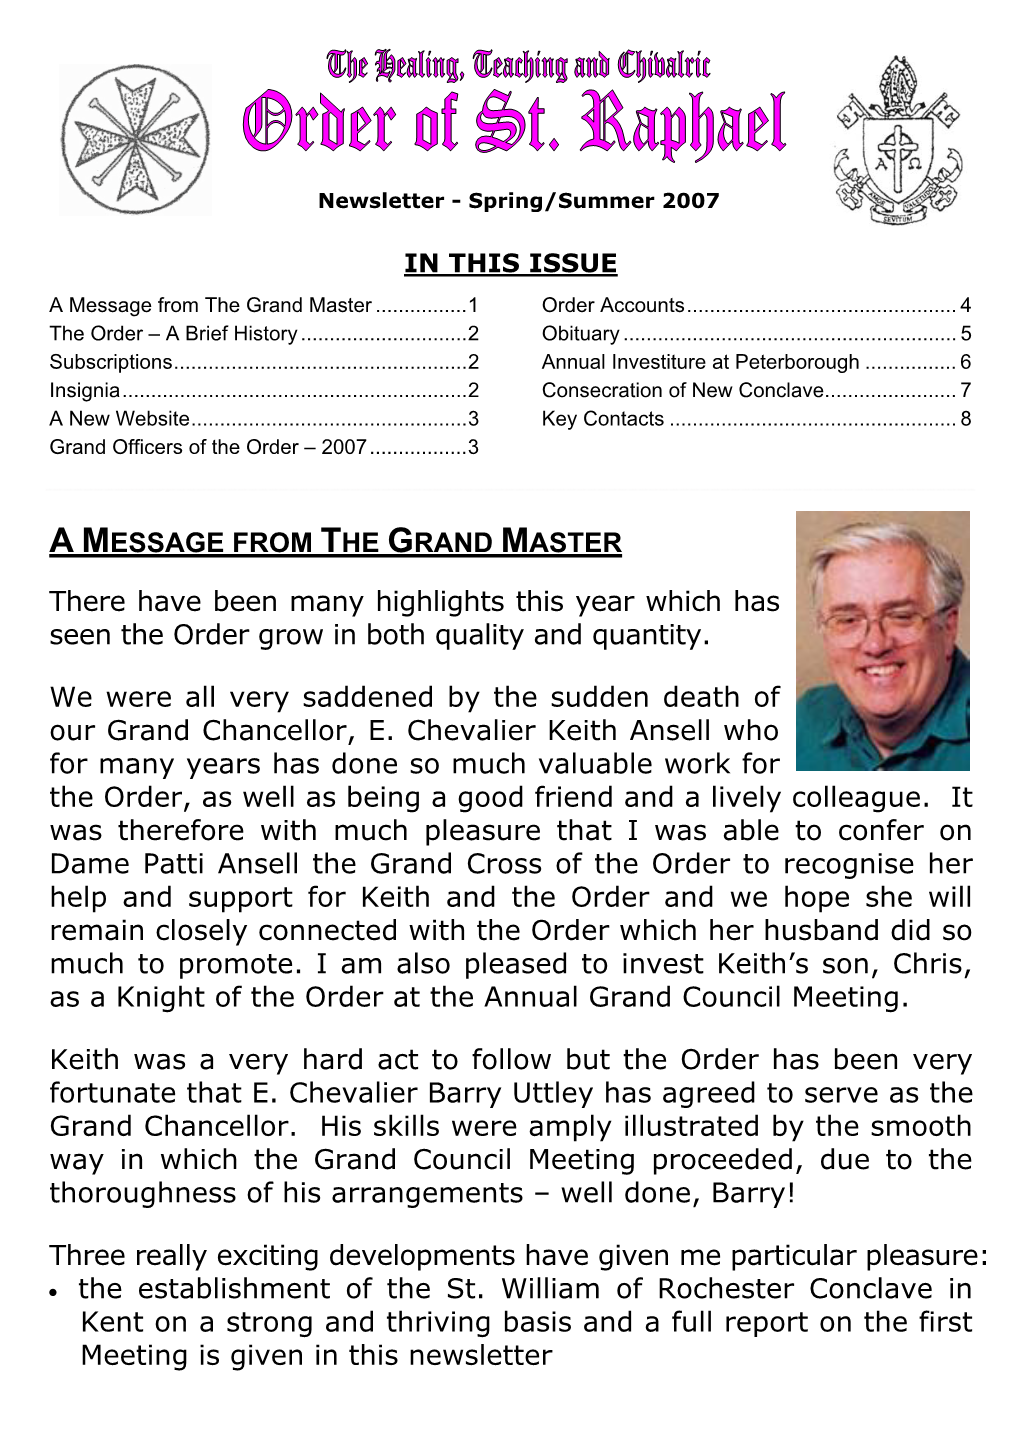 A MESSAGE from the GRAND MASTER There Have Been Many